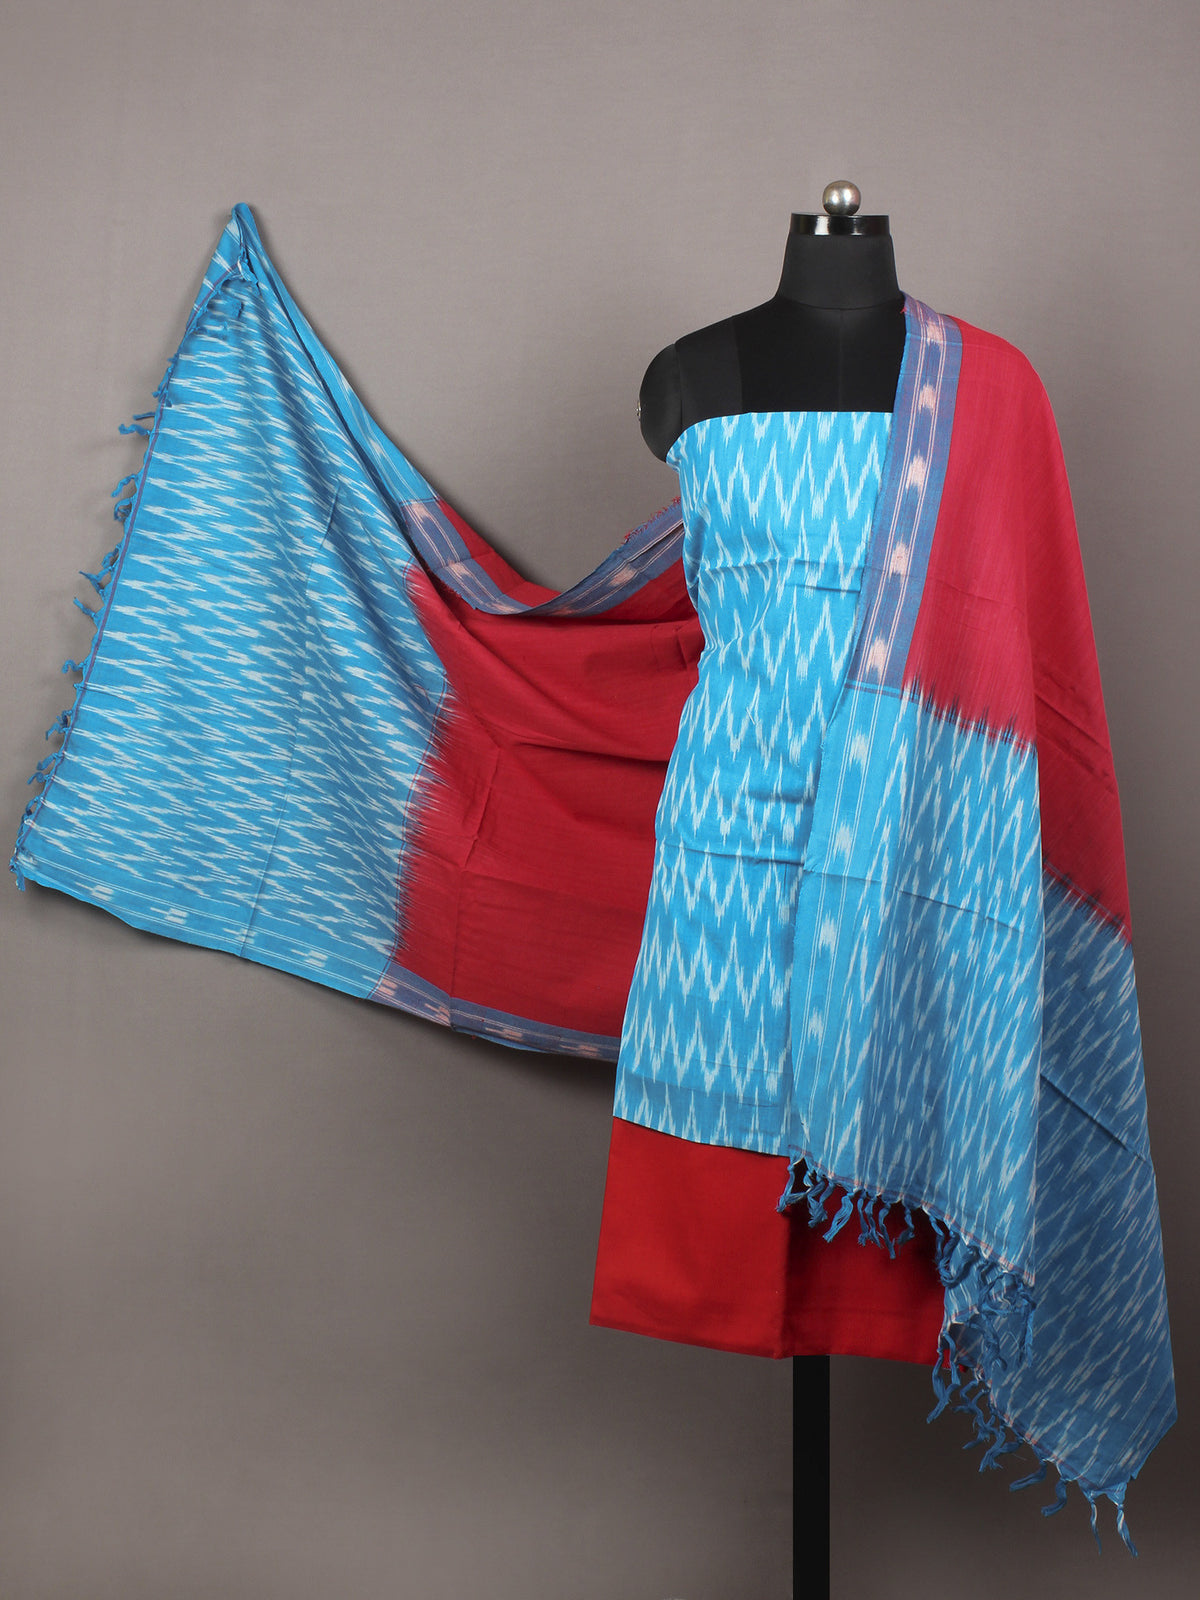 Azure Red White Ikat Handwoven Cotton Suit Fabric Set of 3 - S1002009